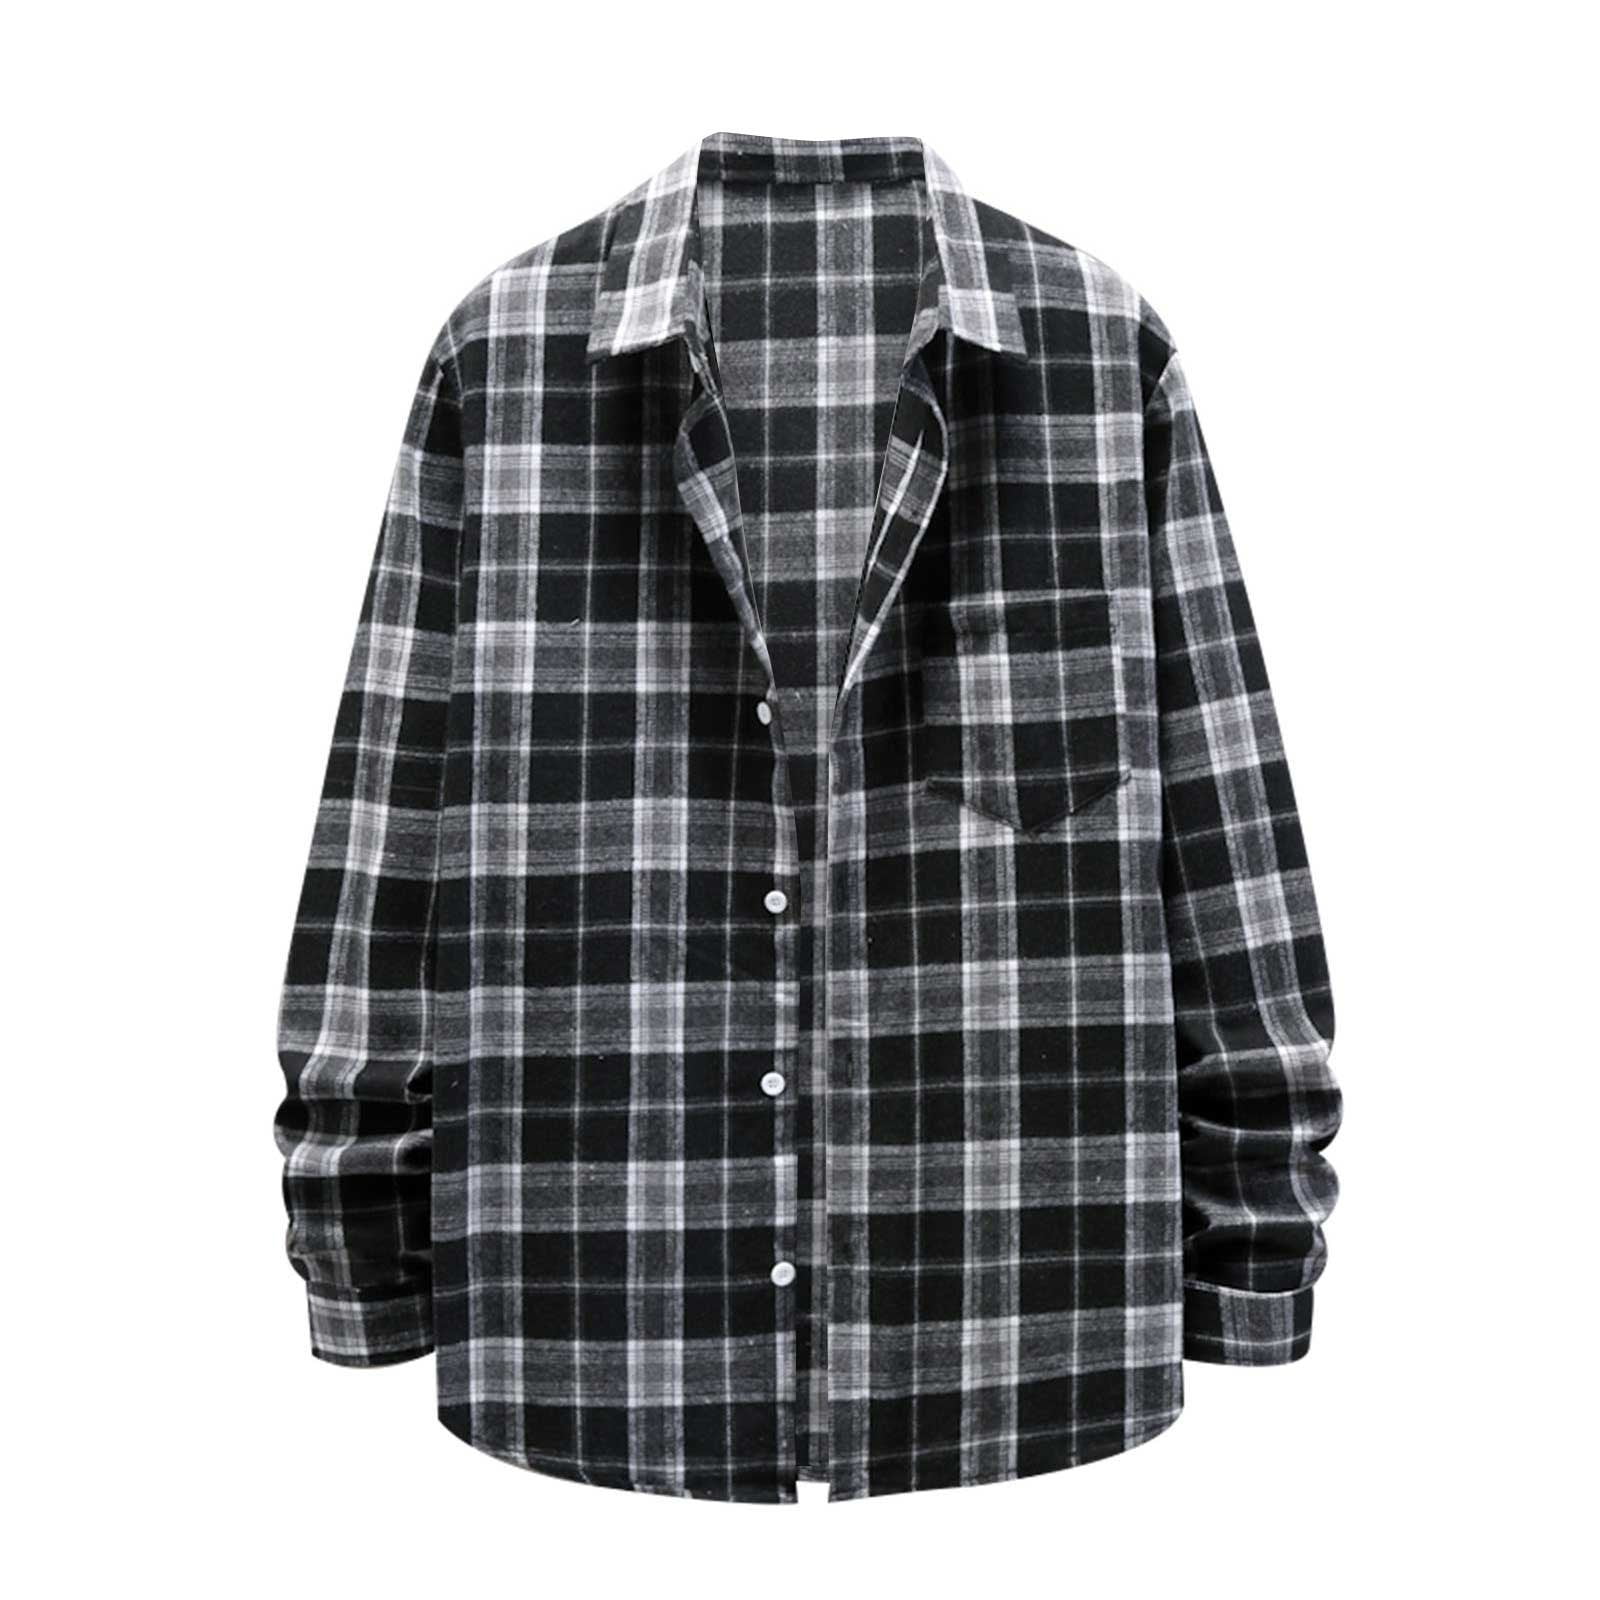 APEXFWDT Men's Plaid Flannel Shirts Casual Long Sleeve Button Down ...